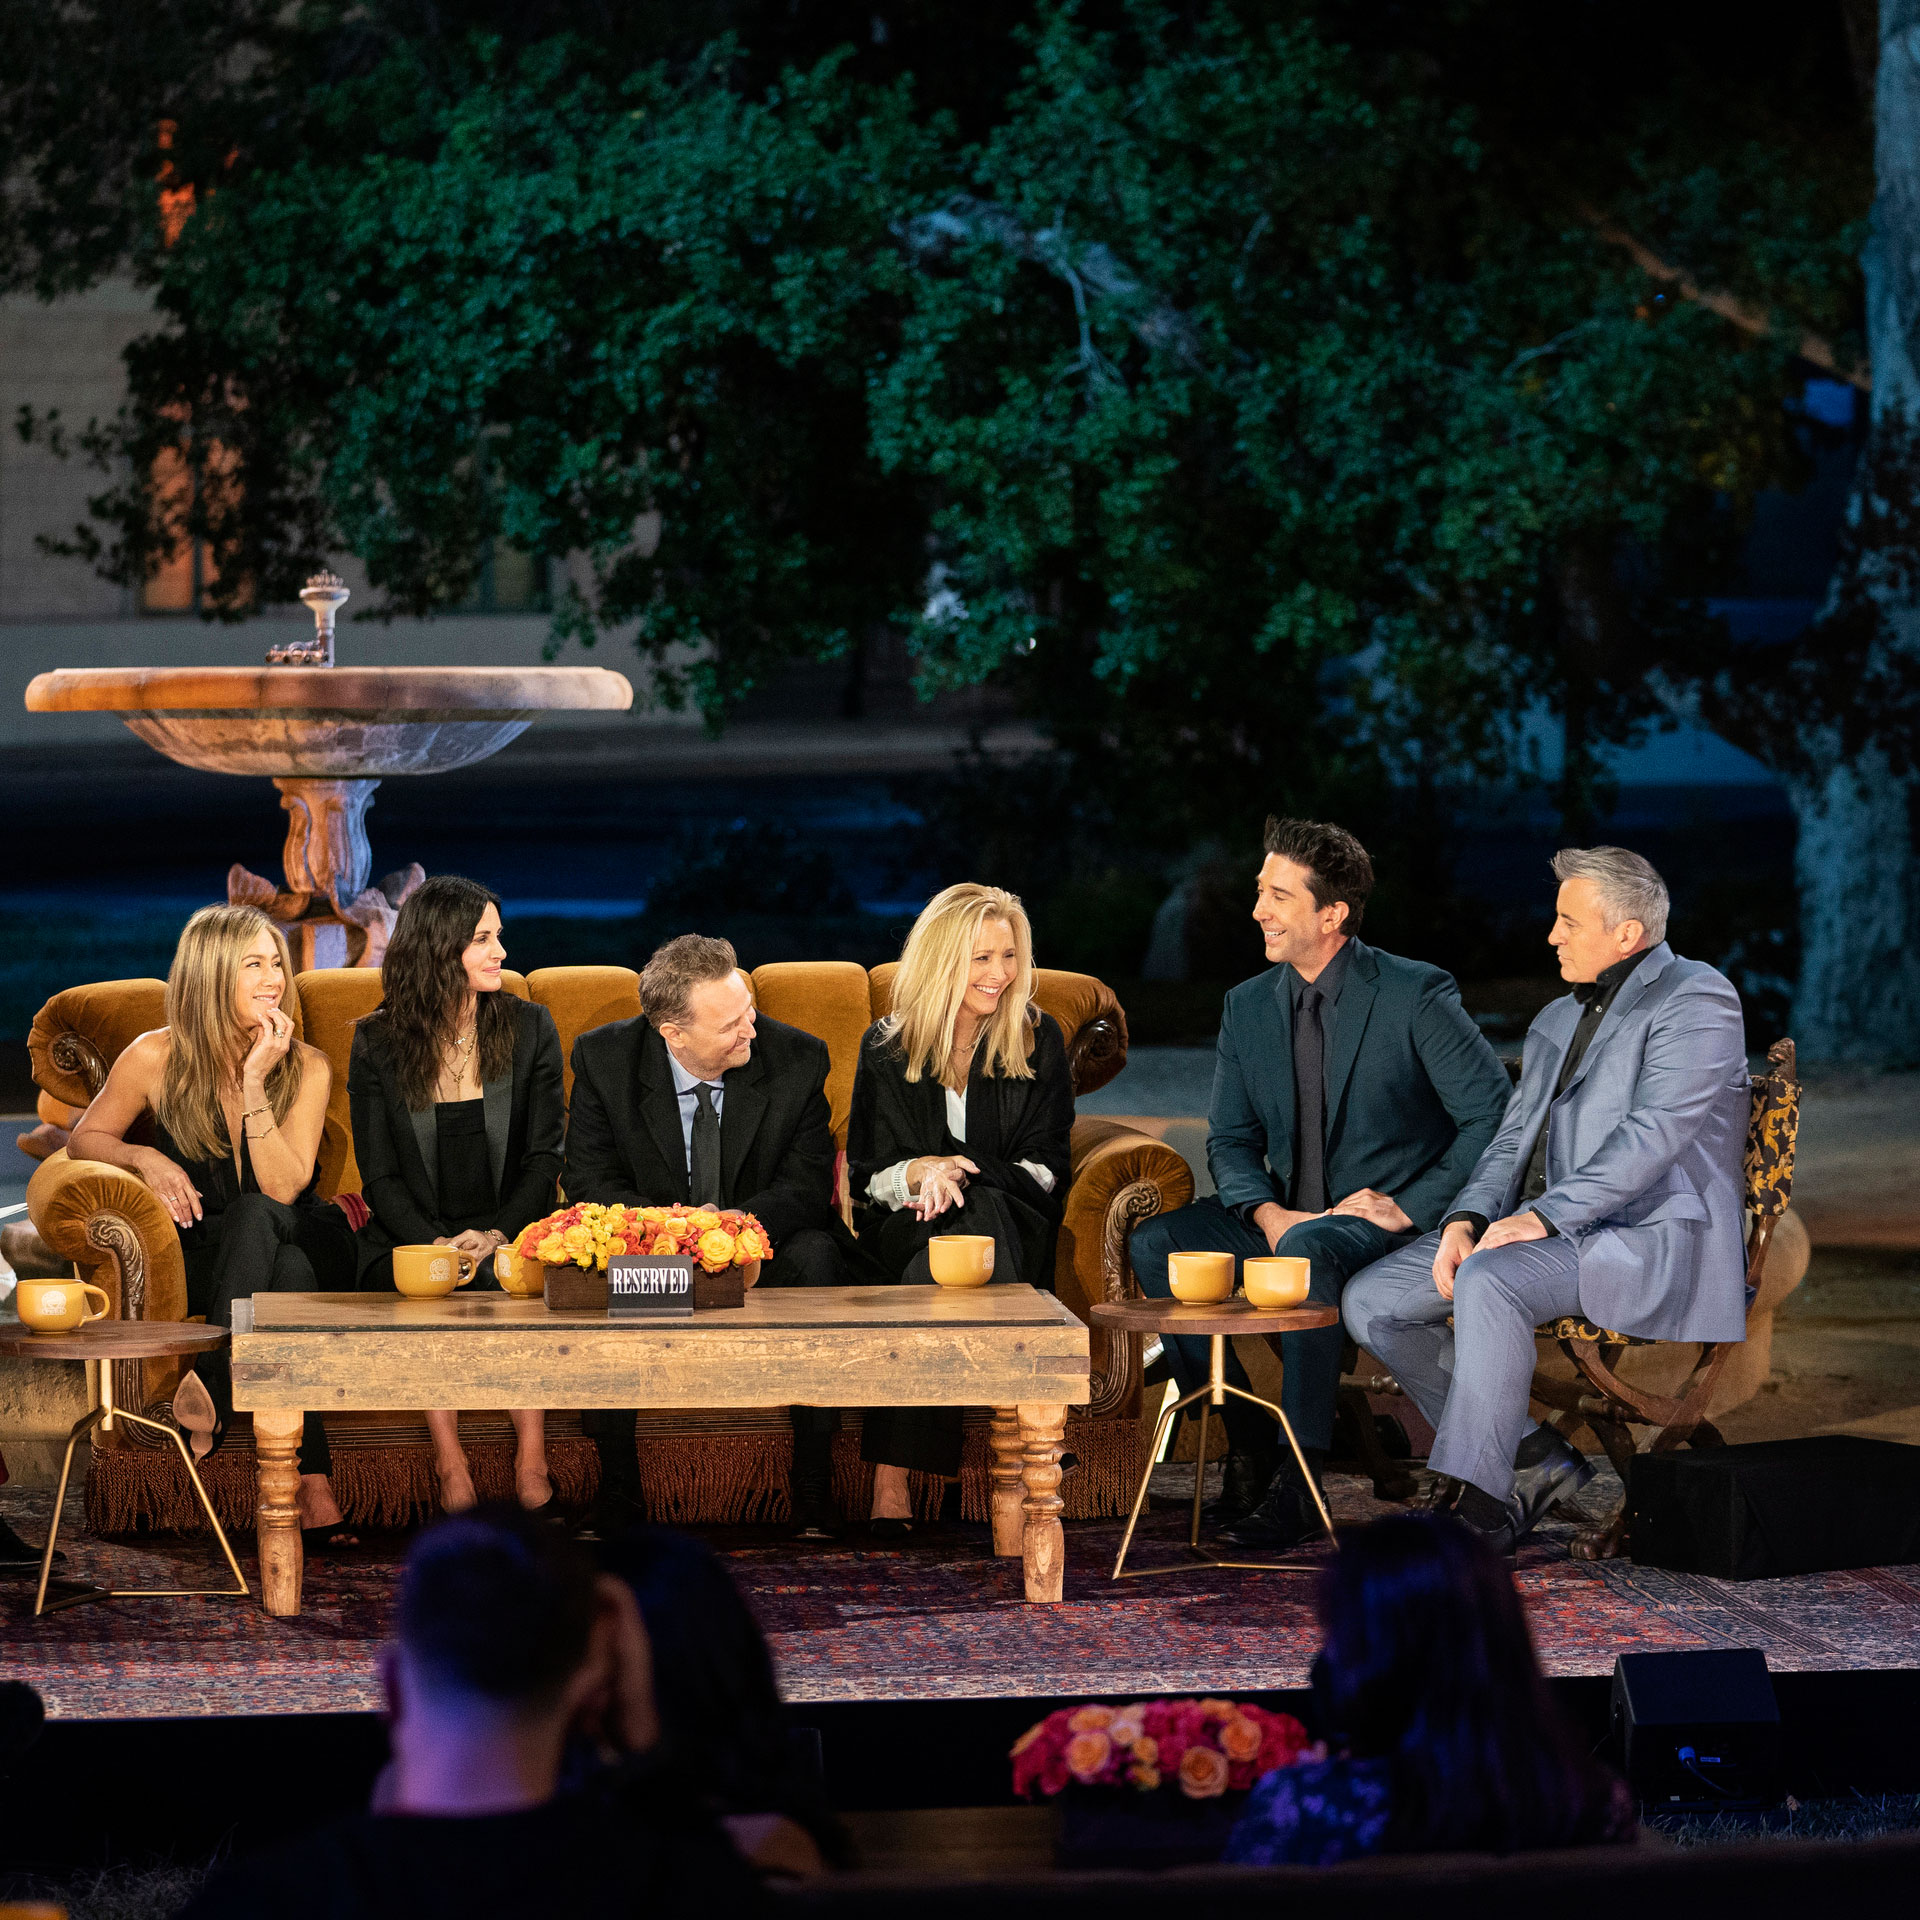 Jennifer Aniston, Courteney Cox, Matthew Perry, Lisa Kudrow, David Schwimmer and Matt LeBlanc are seen during the "Friends" reunion. Courtesy of HBO Max